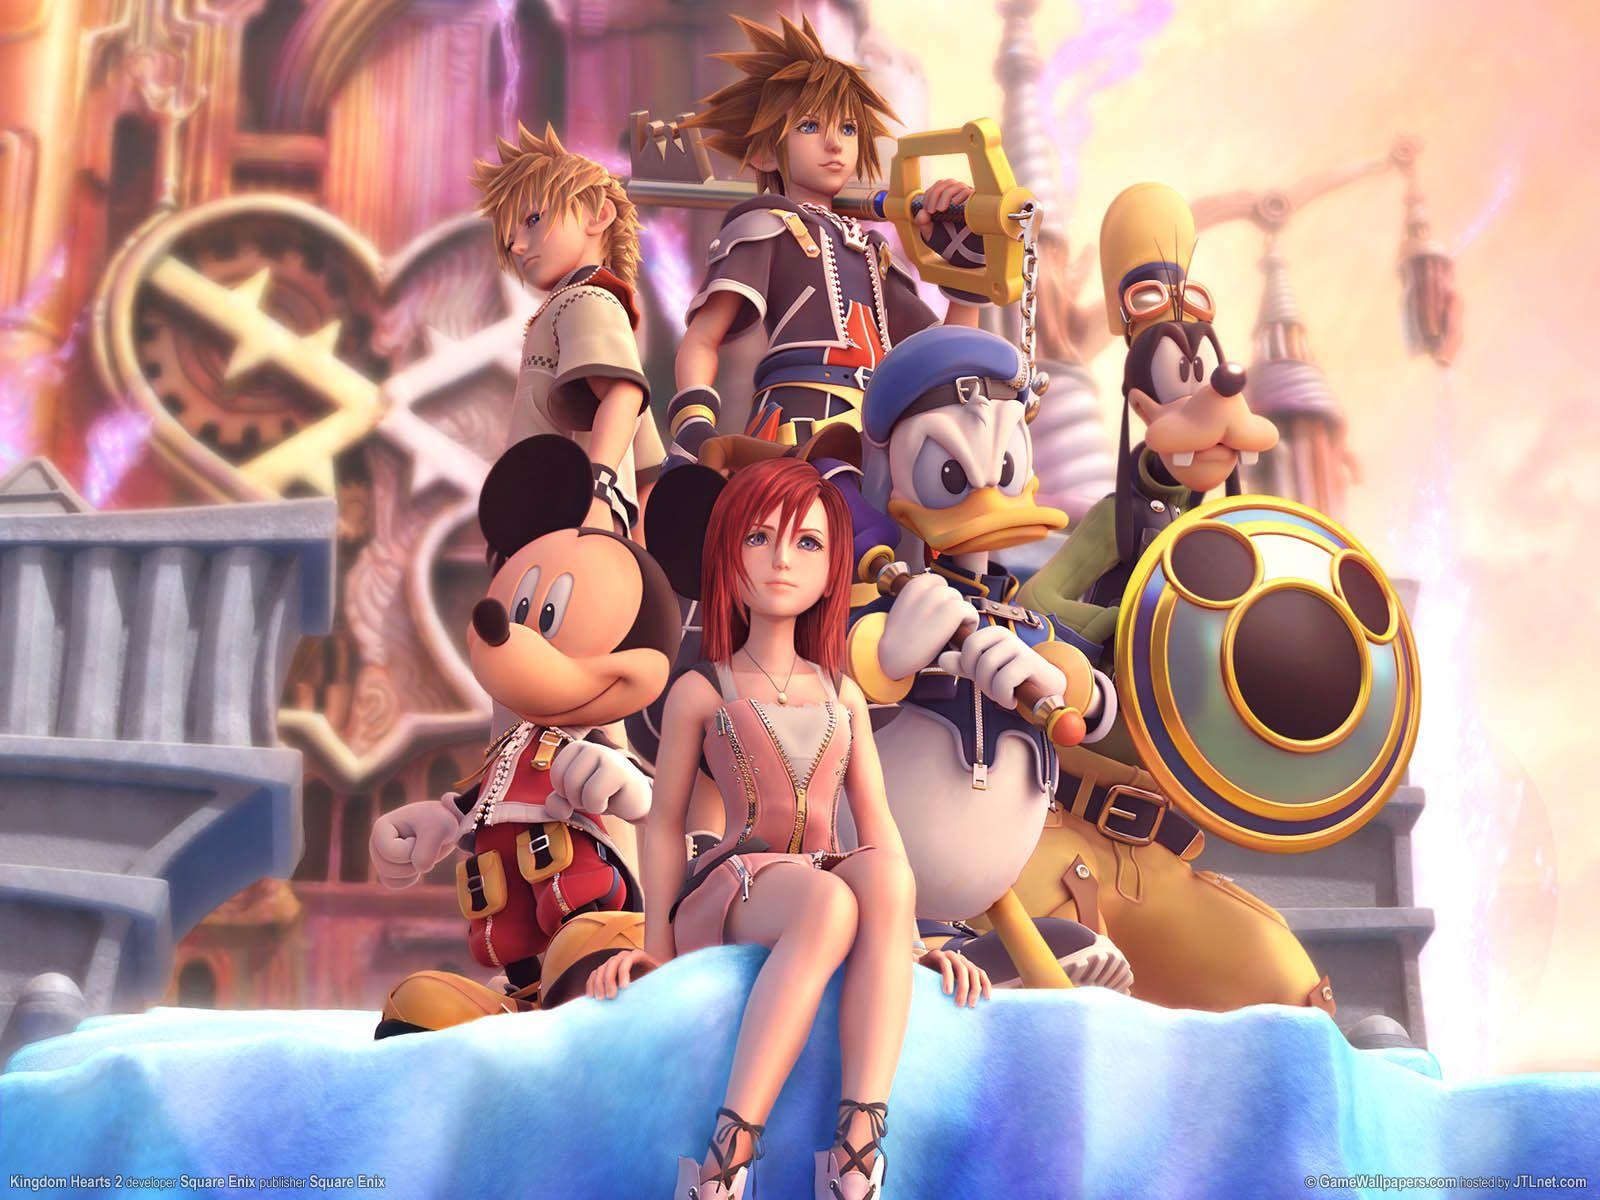 Kingdom Hearts Wallpaper and Background